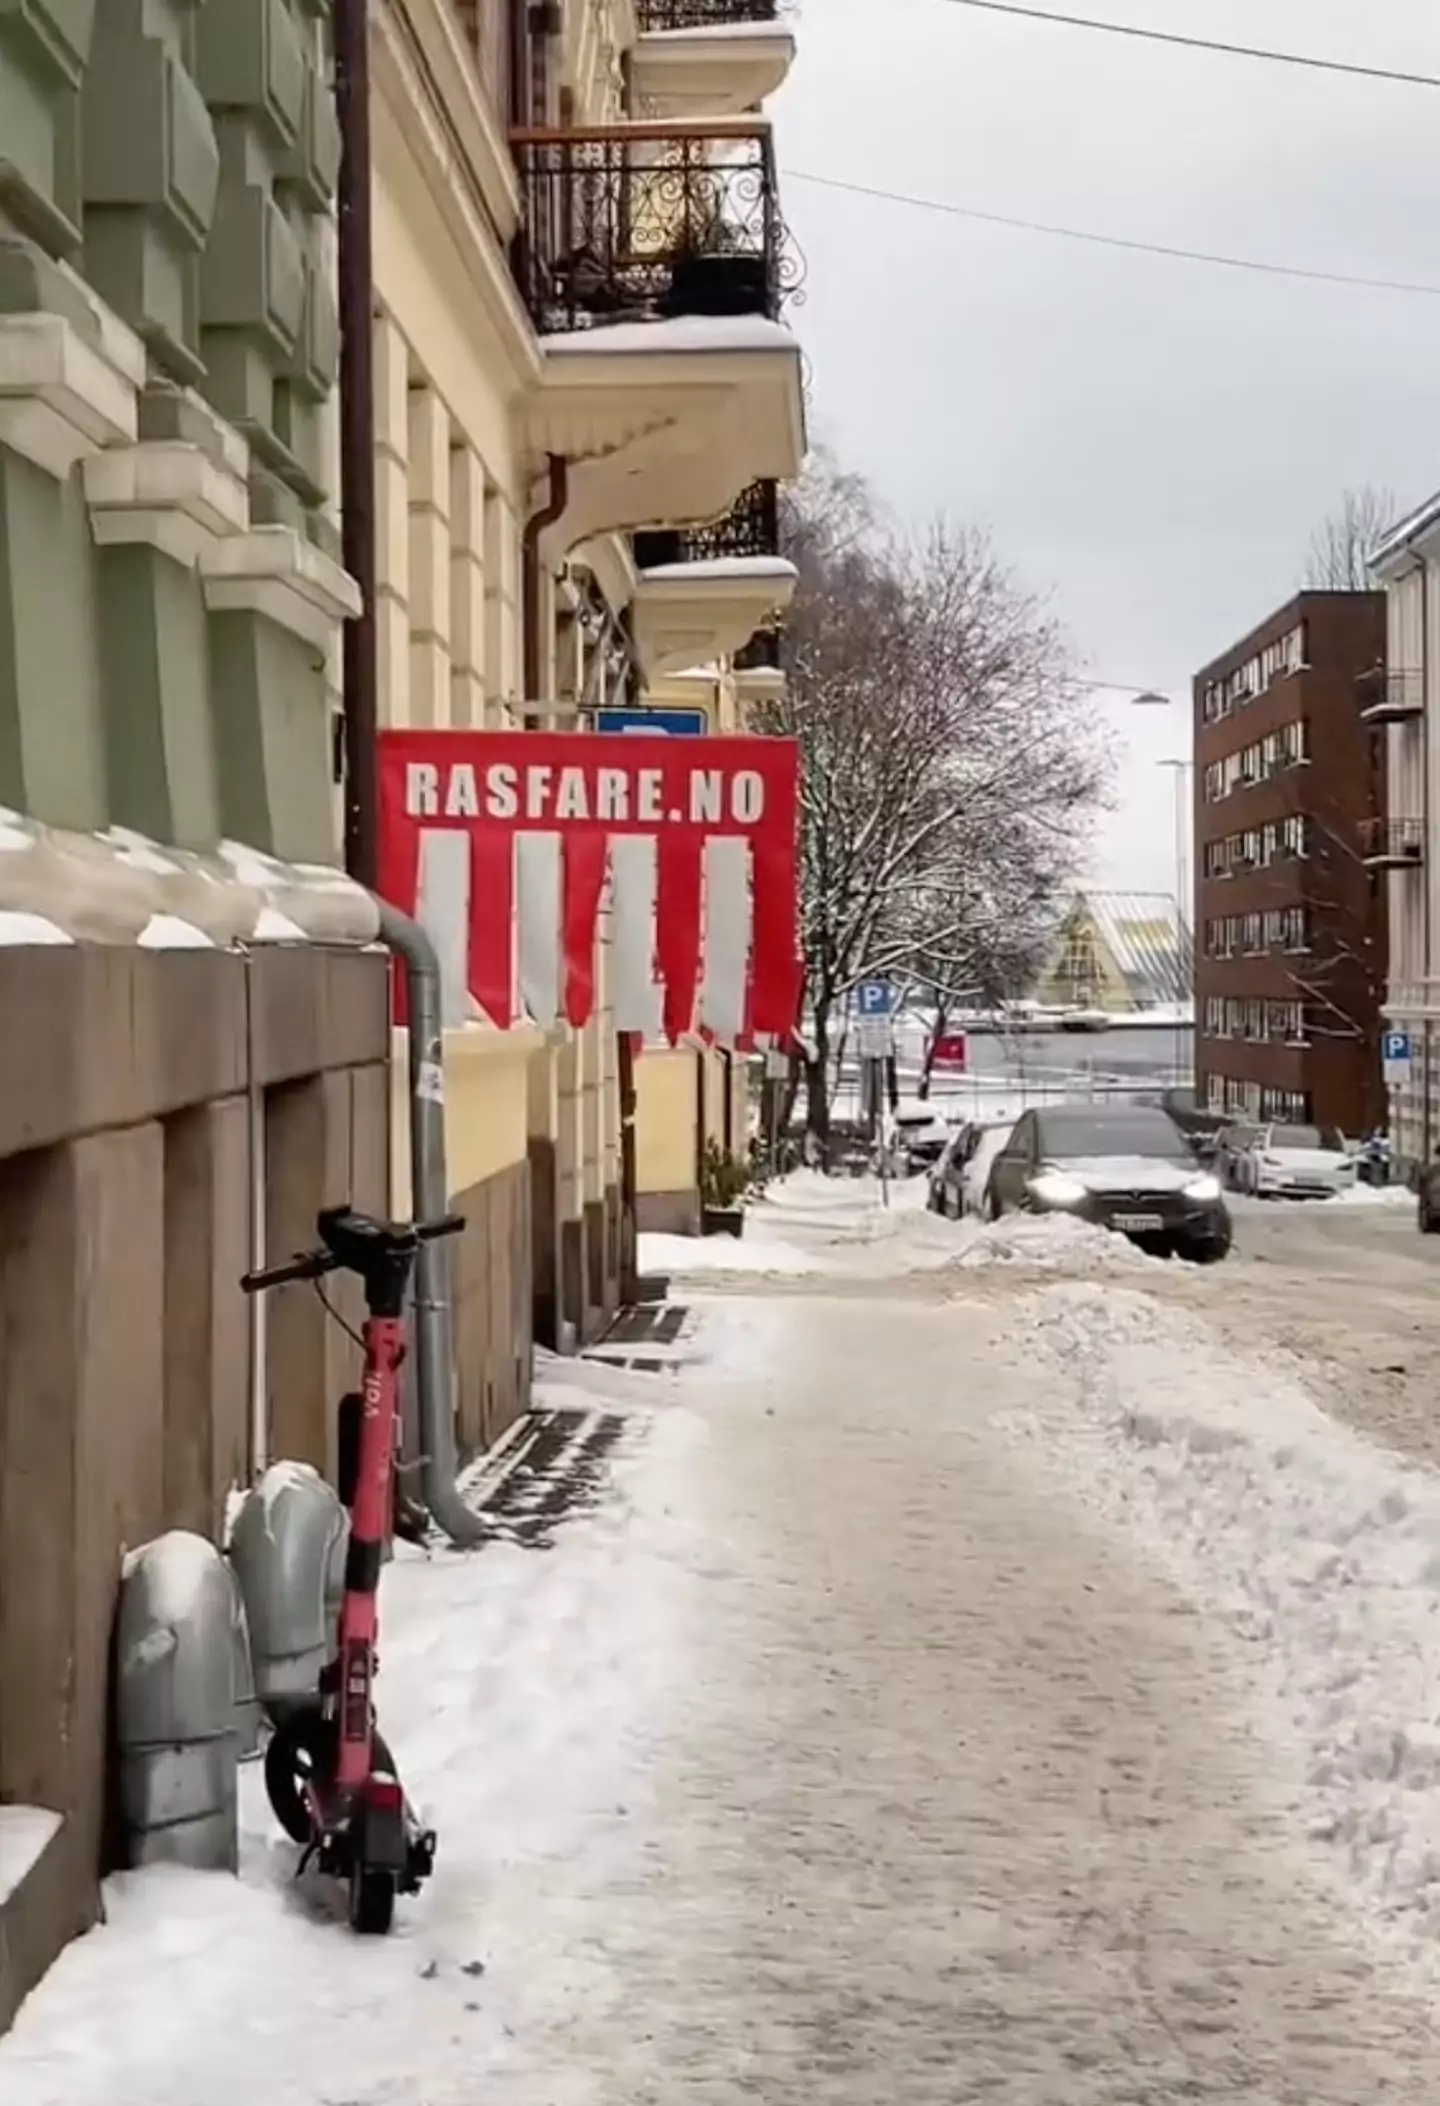 The red warning signs are seen dotted around Oslo in the TikTok clip.